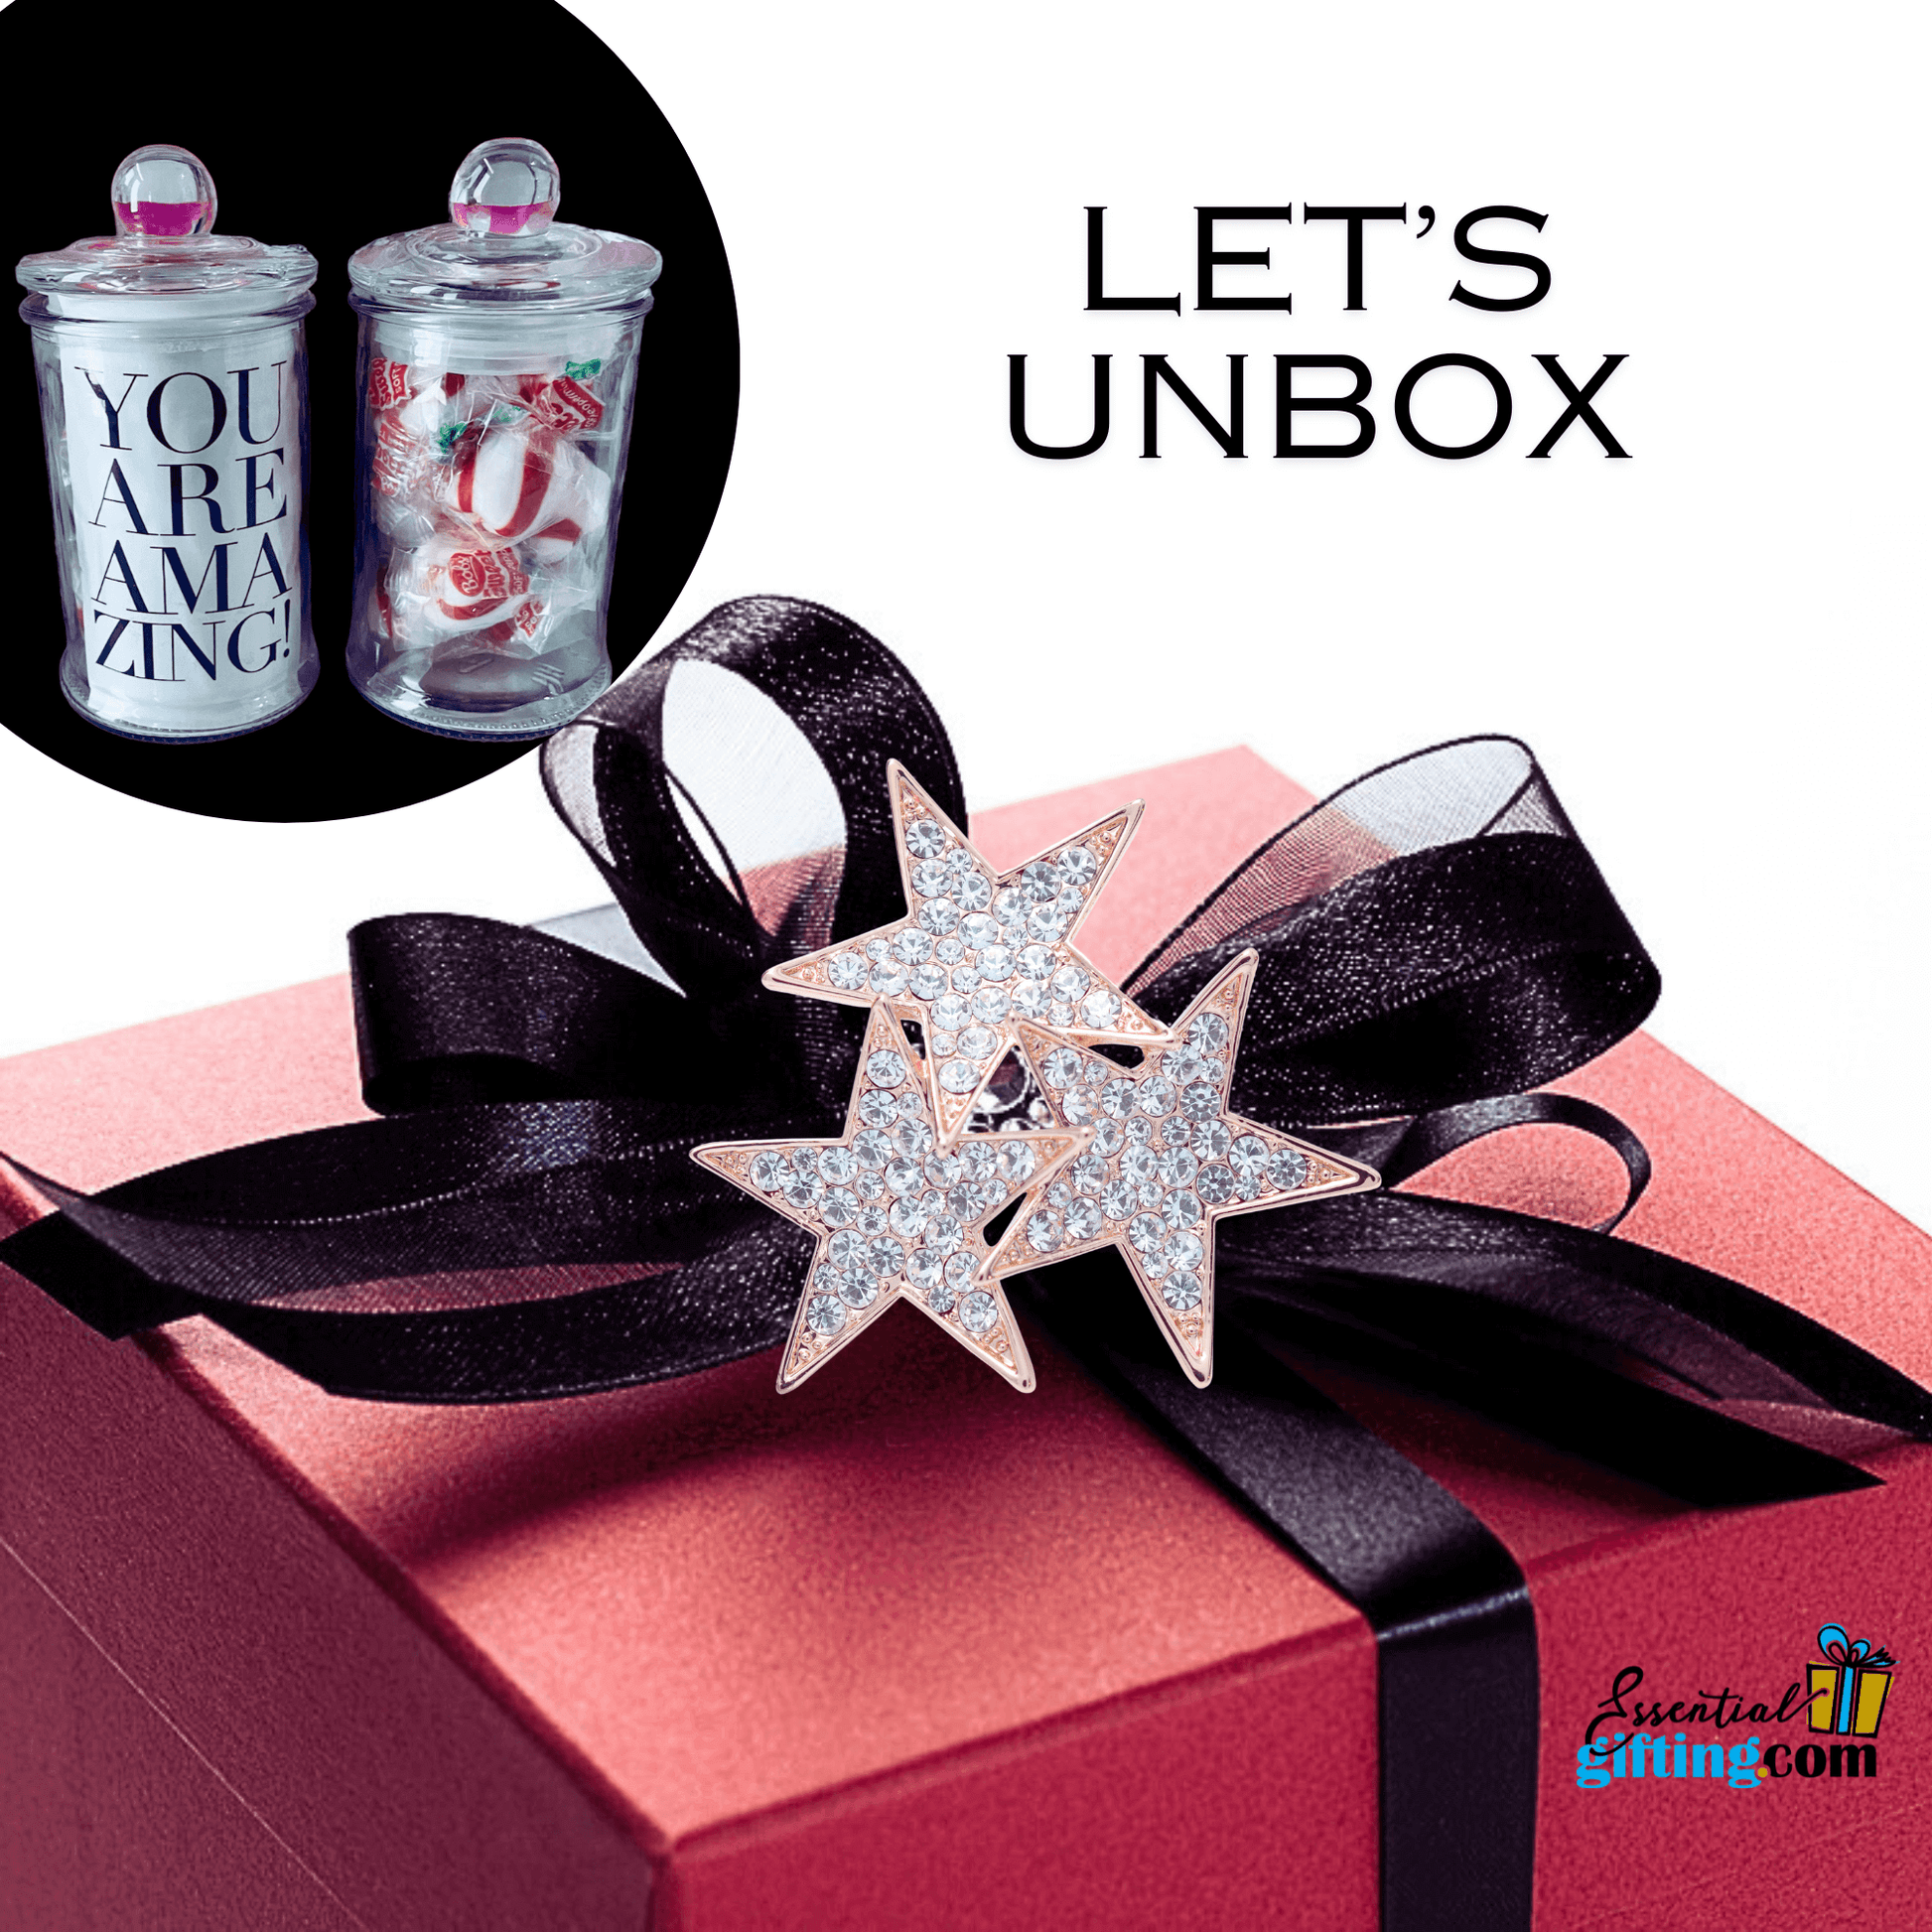 Glamorous gift box with sparkling star ornament and ribbon, complemented by peppermint candy jars against a dark background.